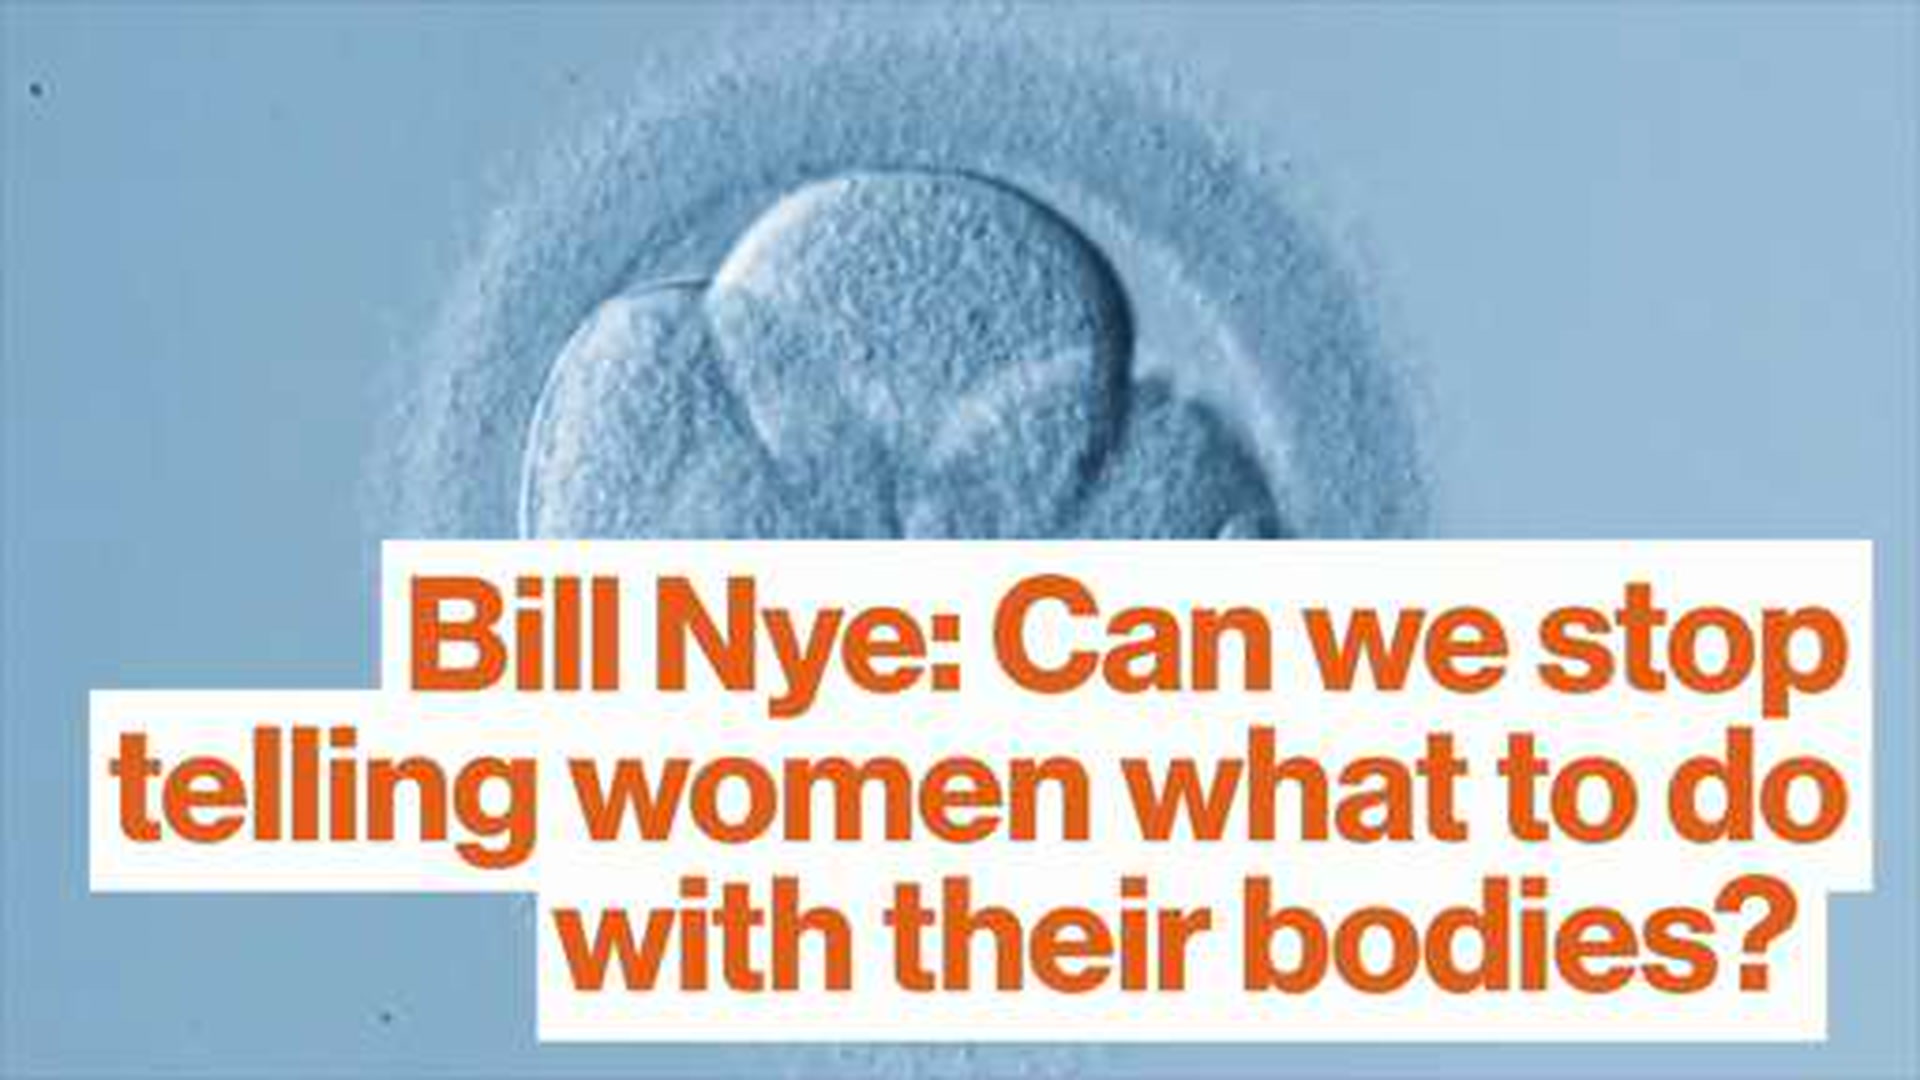 4 Arguments That Prevent Older Women Getting IVF – And Why They Are Deeply Flawed ...